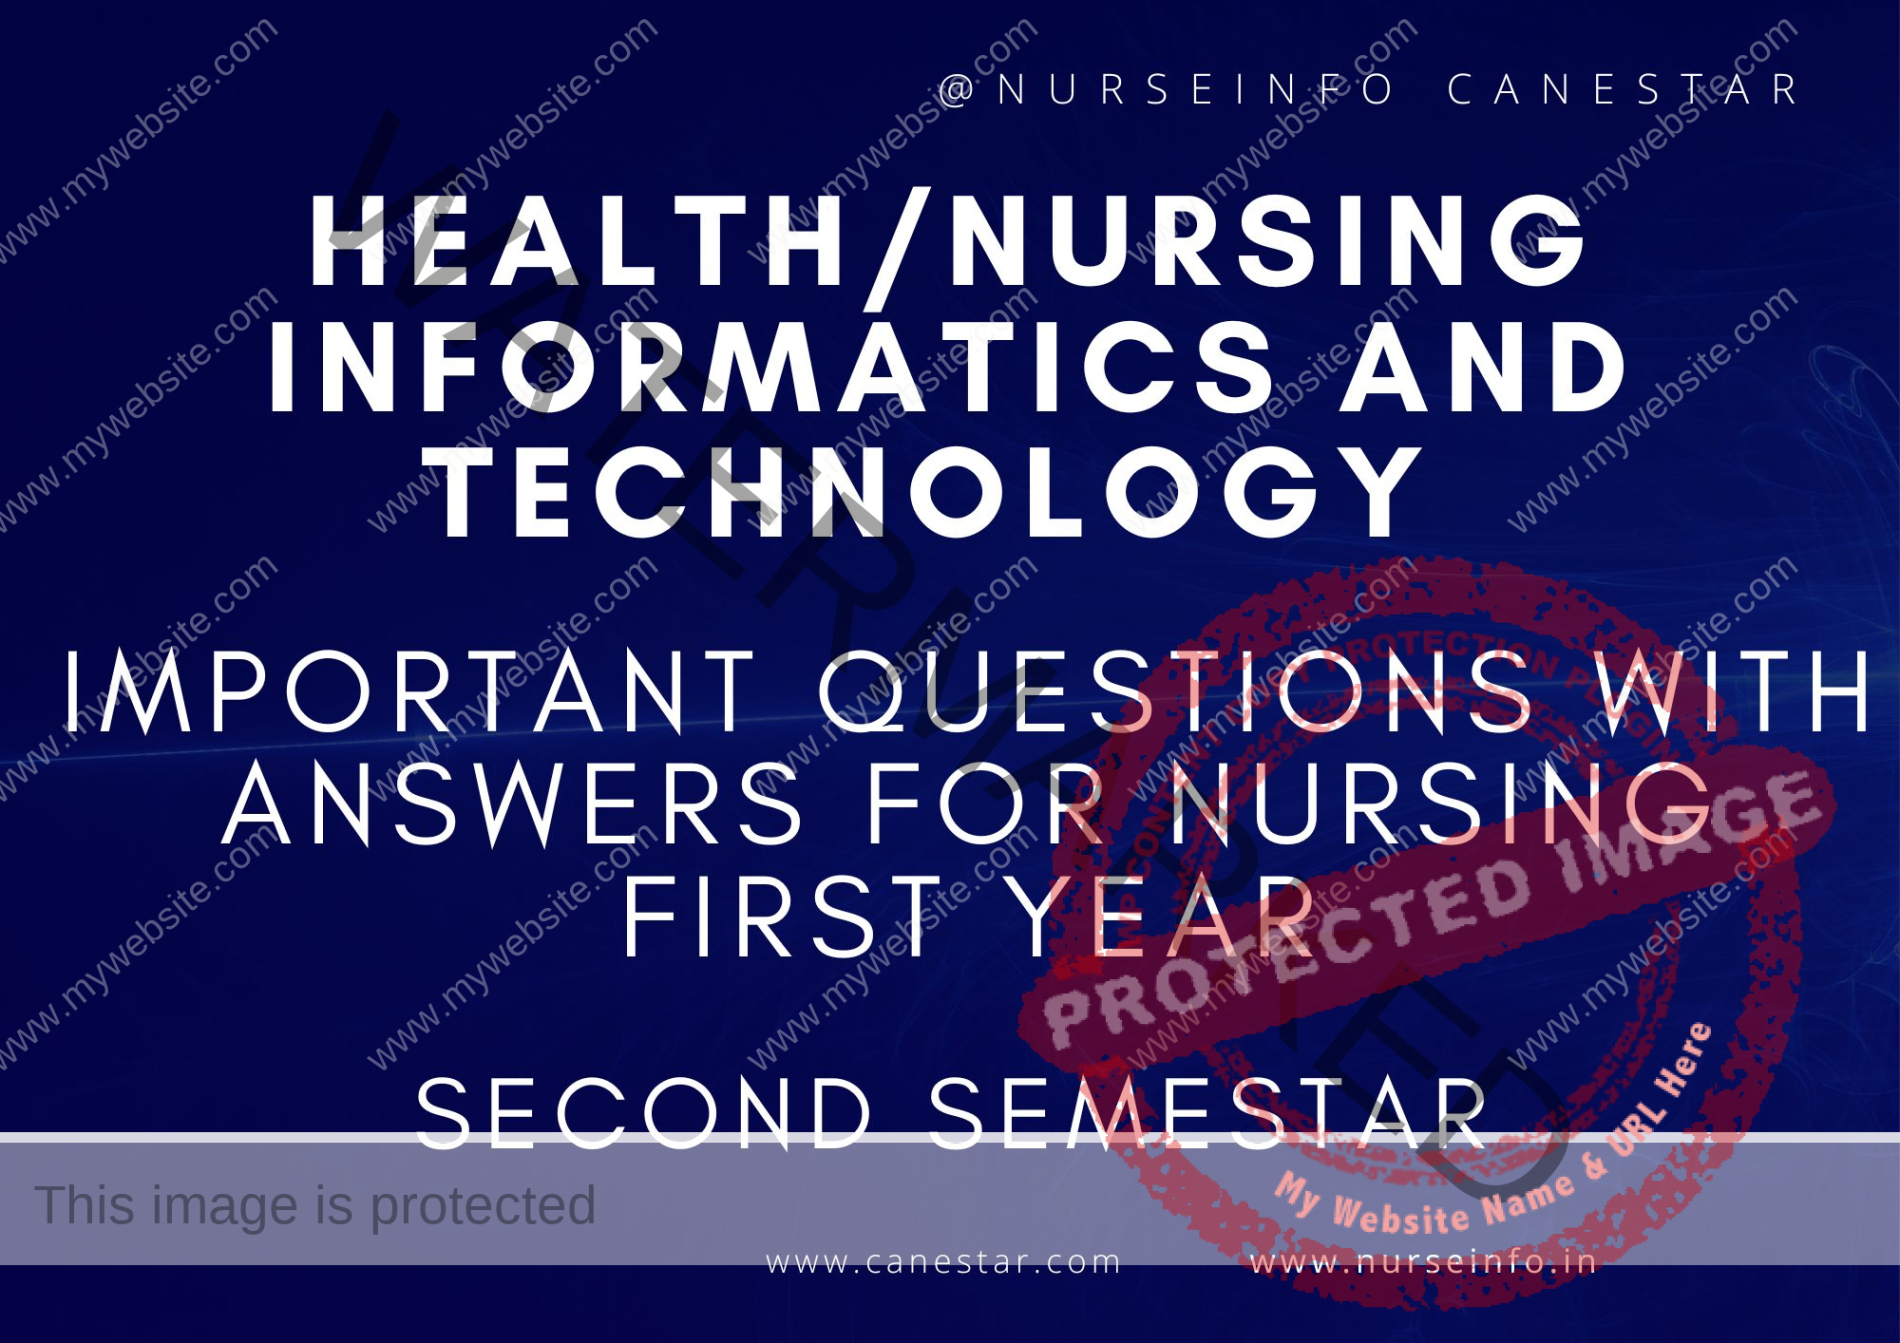 ﻿ Health Nursing Informatics and Technology Important Questions and Answers for BSC Nursing First year Second Semester